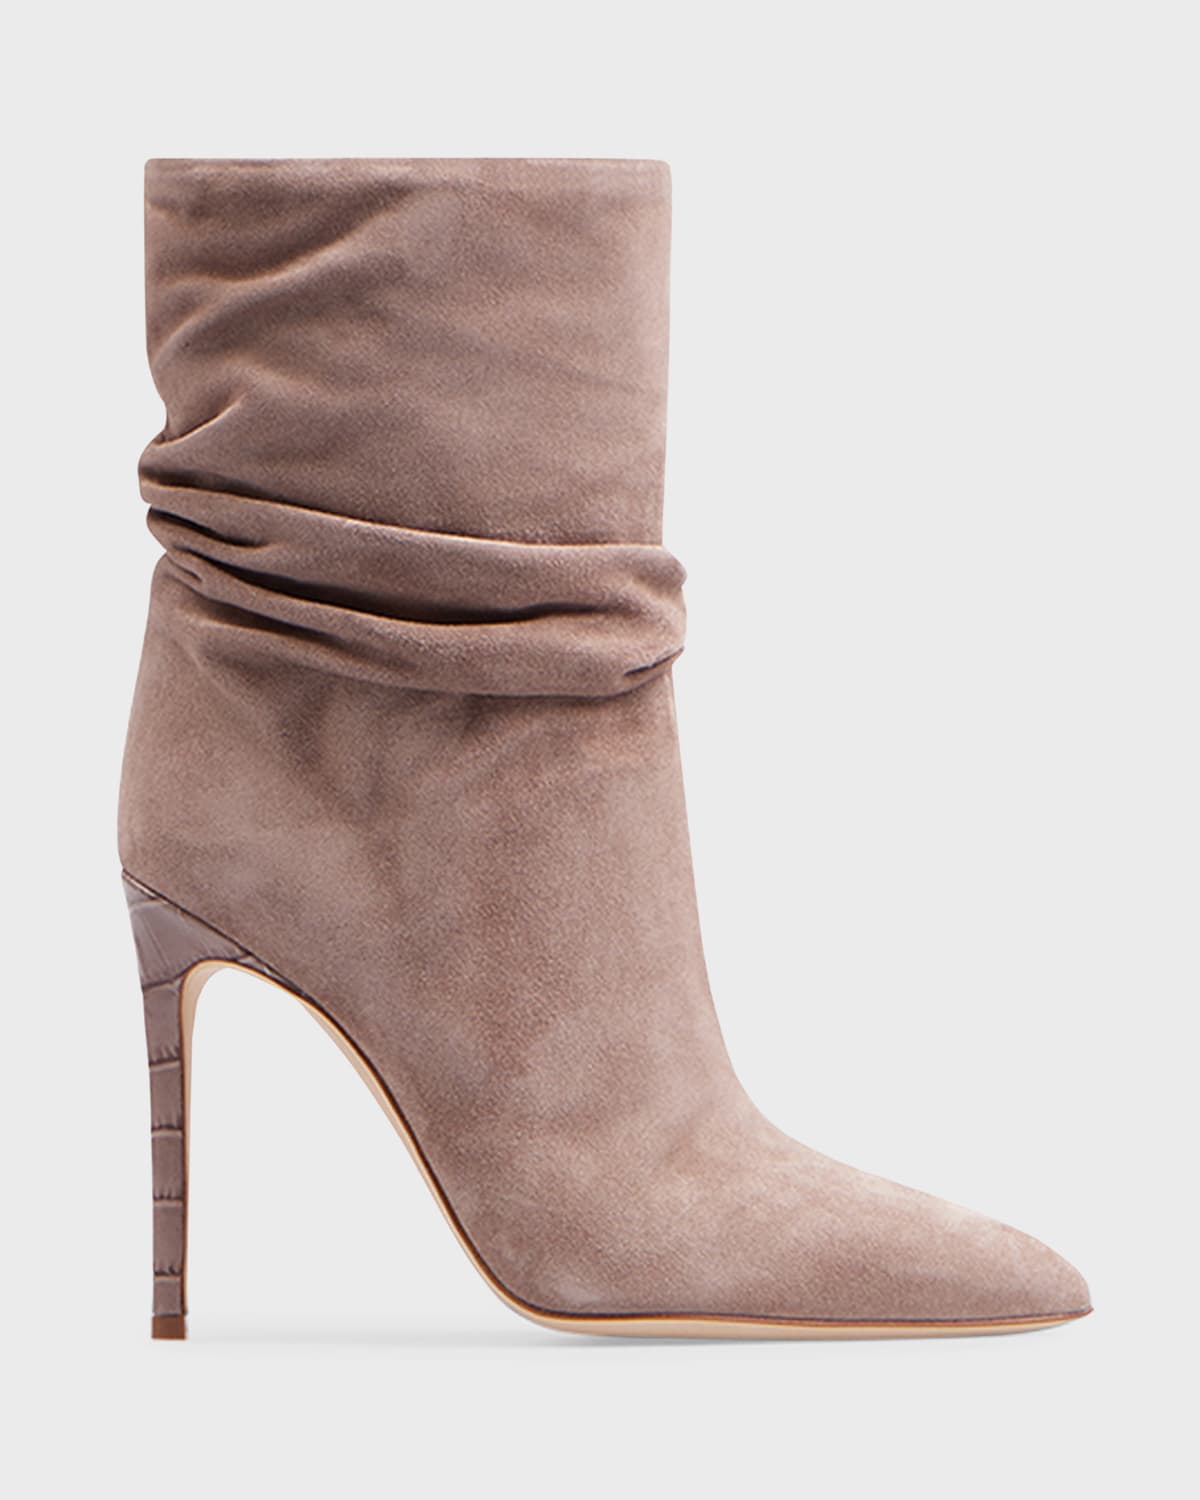 PARIS TEXAS 105MM SLOUCHY SUEDE STILETTO BOOTIES